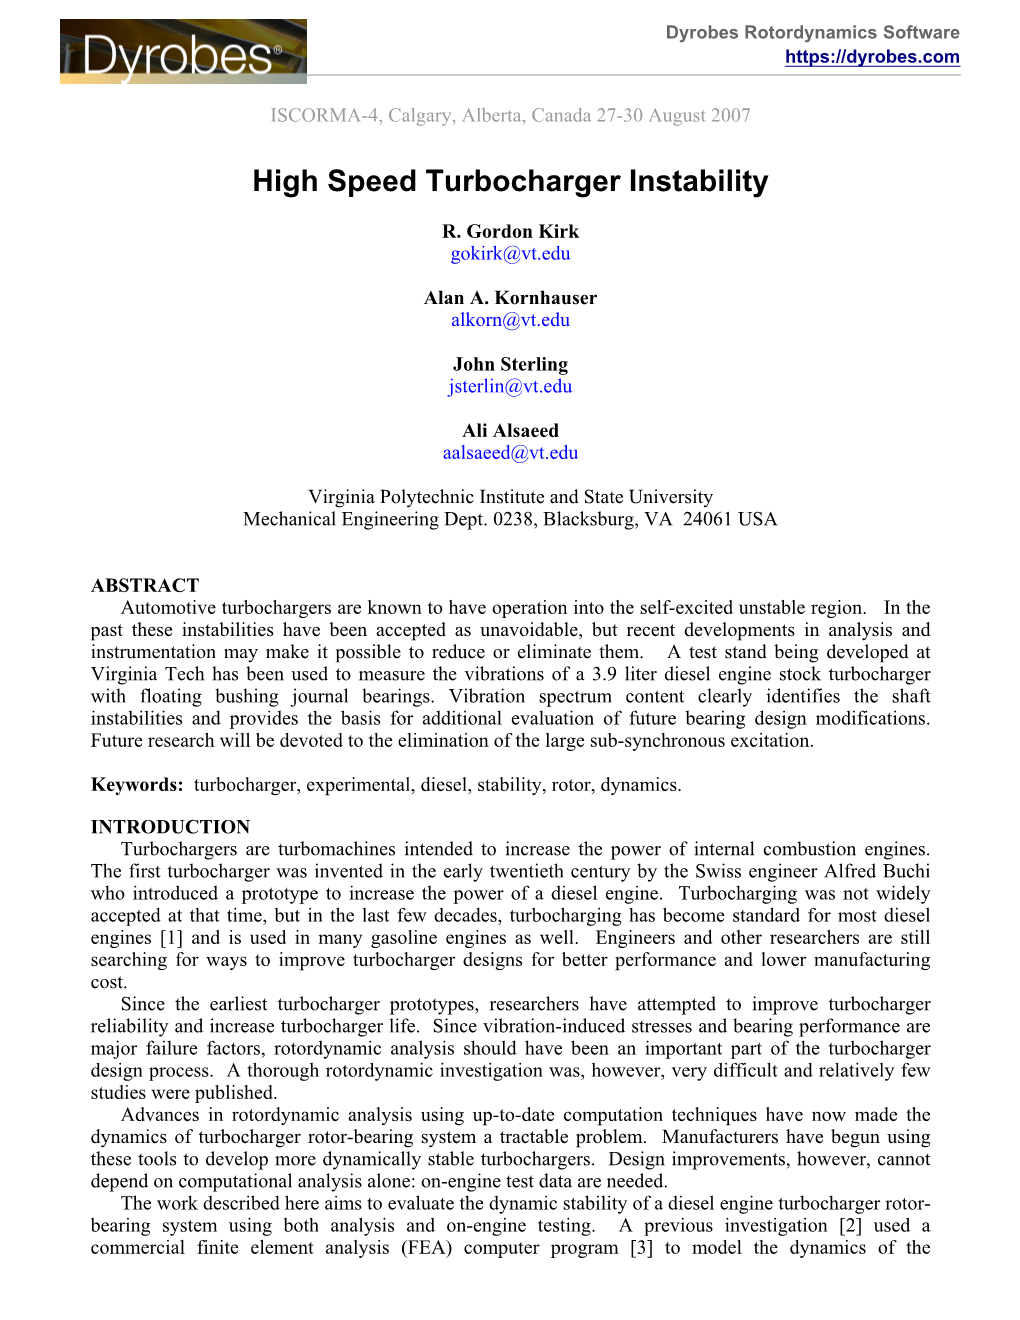 High Speed Turbocharger Instability